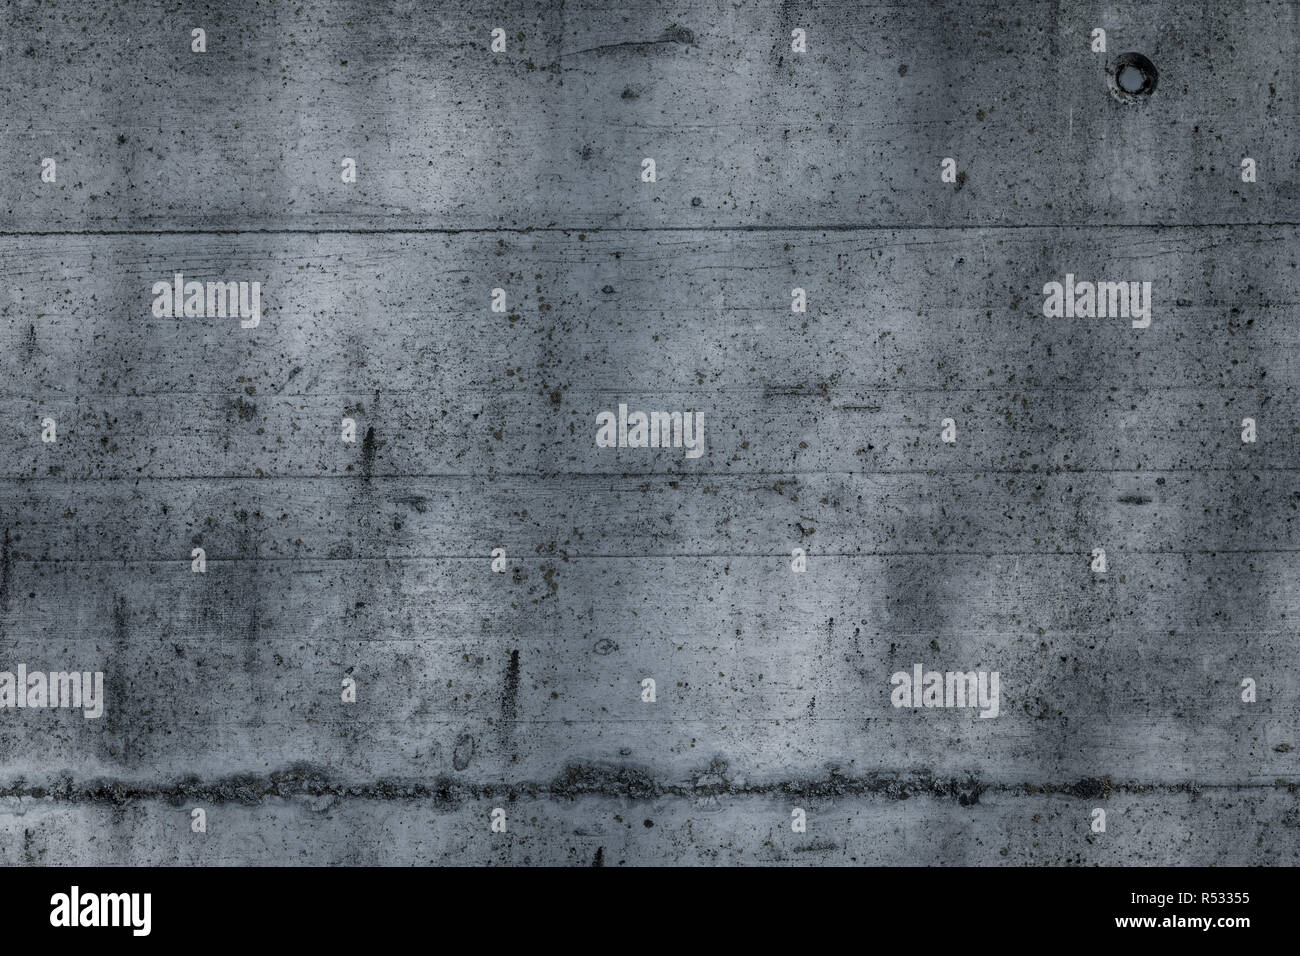 High Resolution Grey Concrete Wall Texture Background Motif Stock Photo Alamy